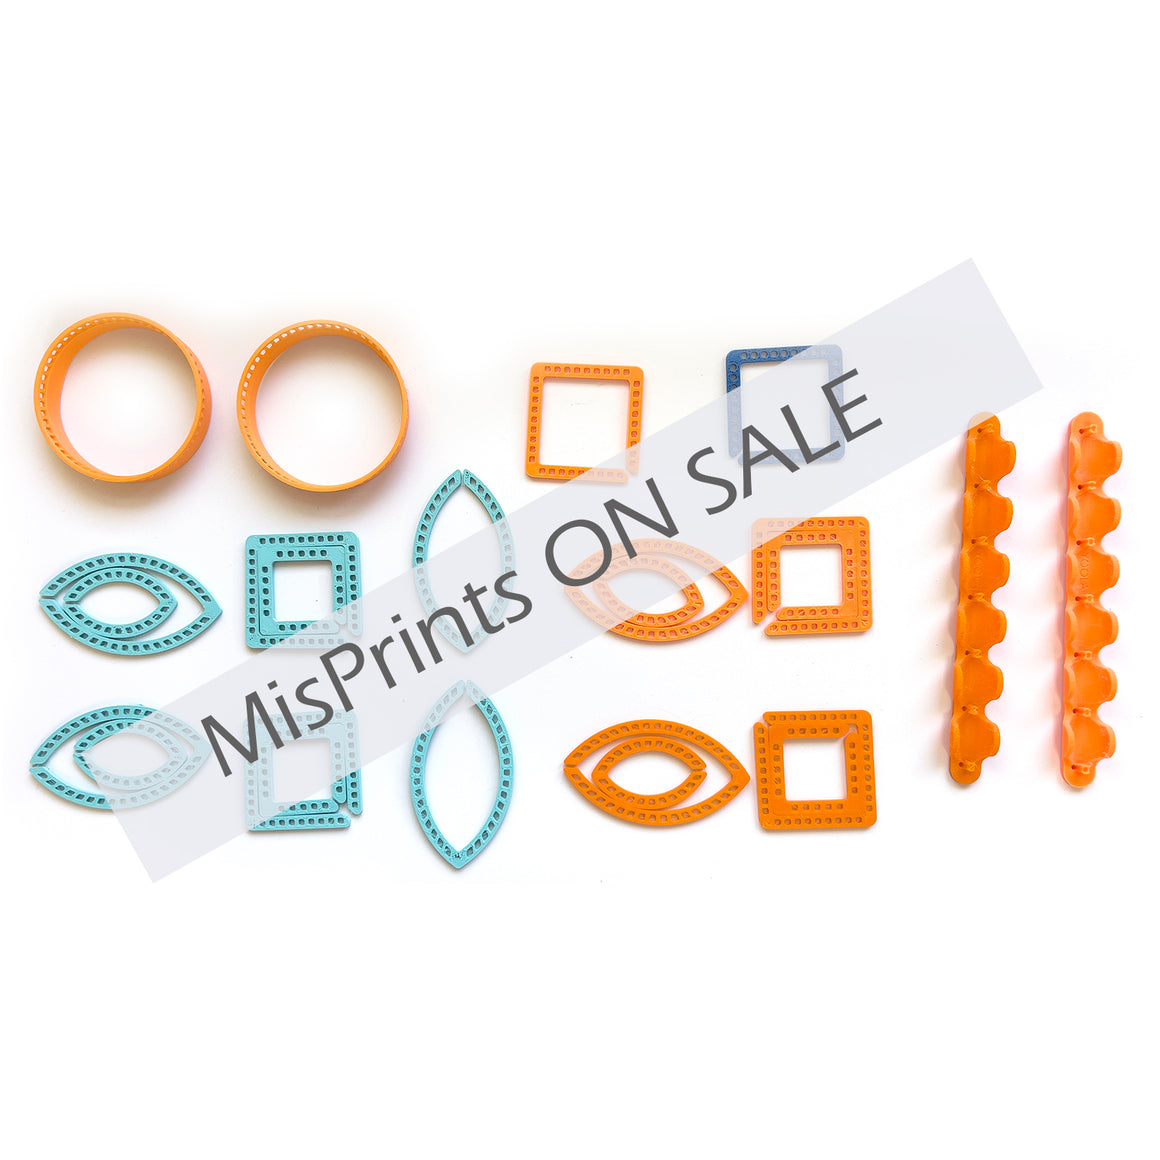 MisPrints - wire crochet tools - clearance - SOLD OUT